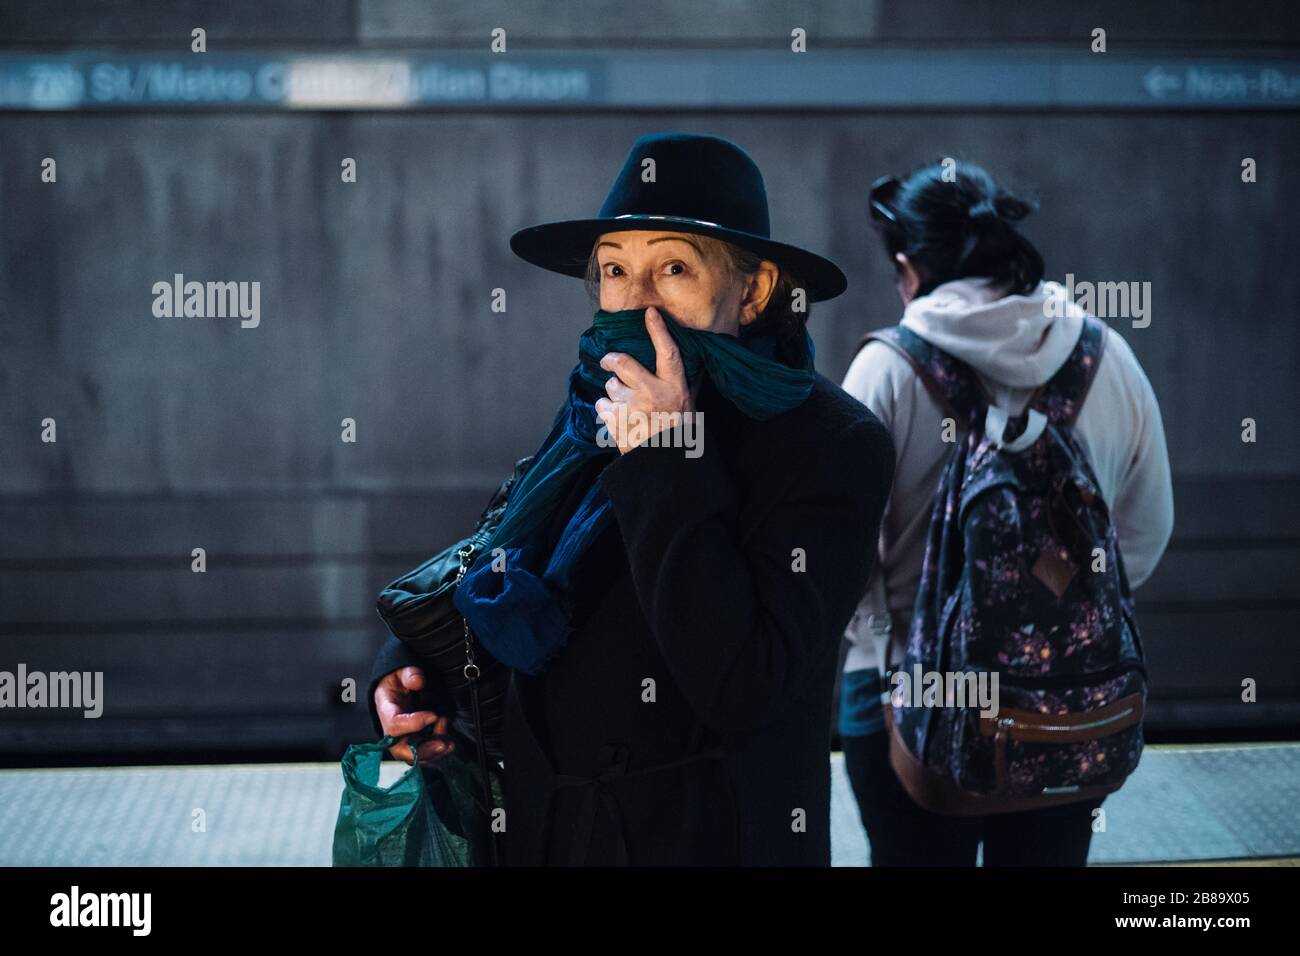 A woman covers her face with a scarf during covid-19 global pandemic mask shortage waiting for metro train in Los Angeles, California Stock Photo